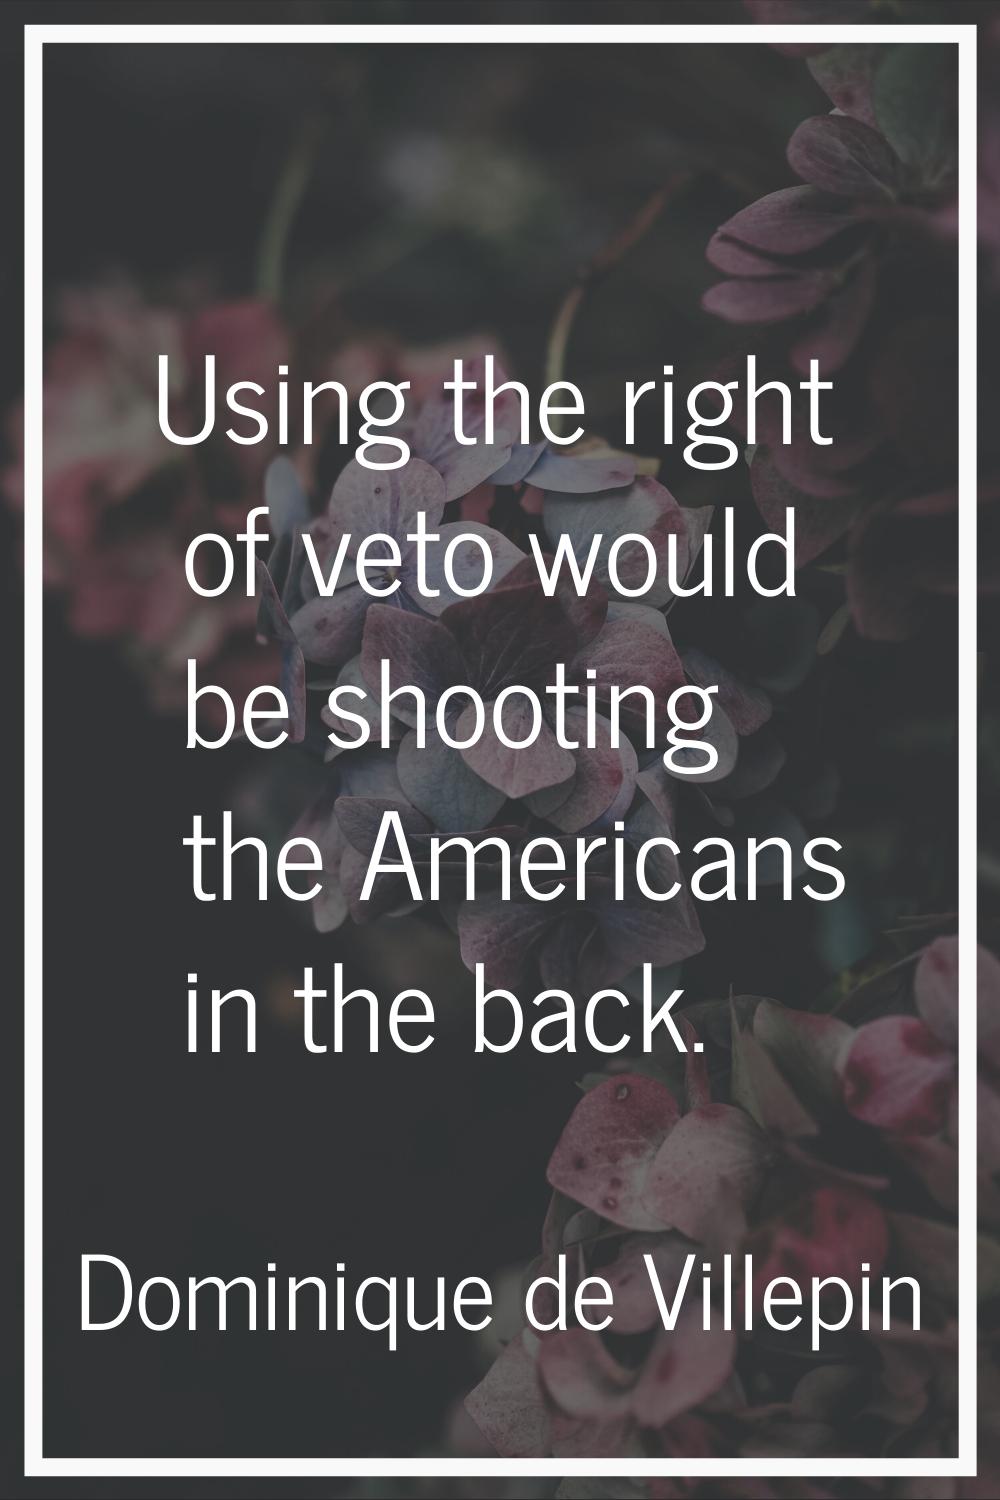 Using the right of veto would be shooting the Americans in the back.